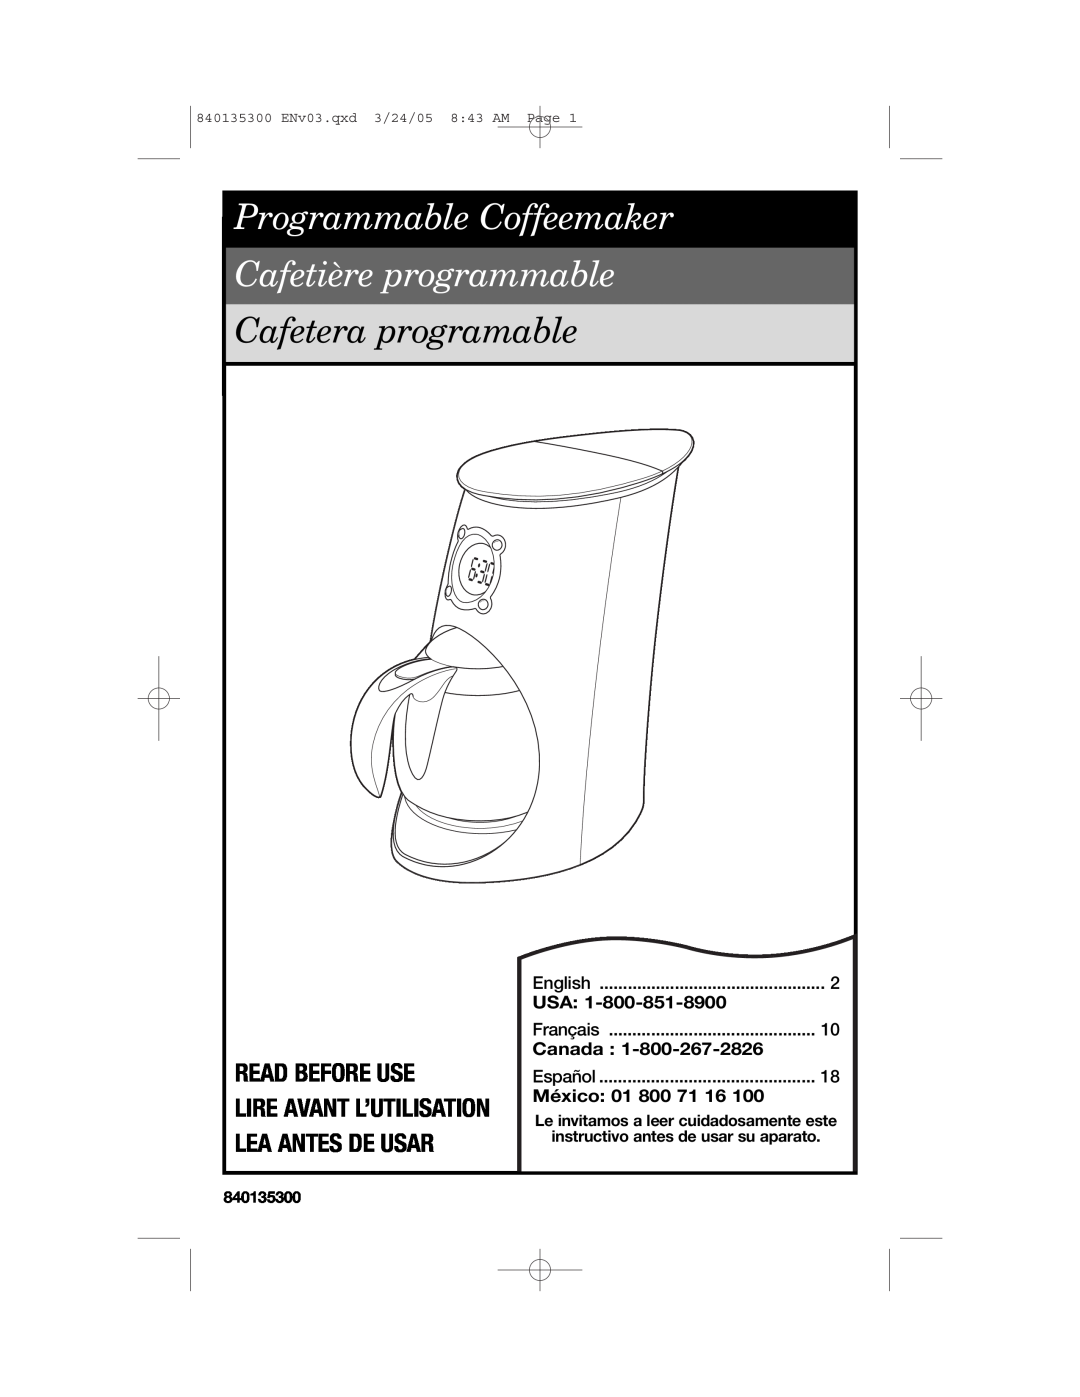 Hamilton Beach 42494 manual Read Before Use, Programmable Coffeemaker Cafetière programmable, Cafetera programable, Canada 